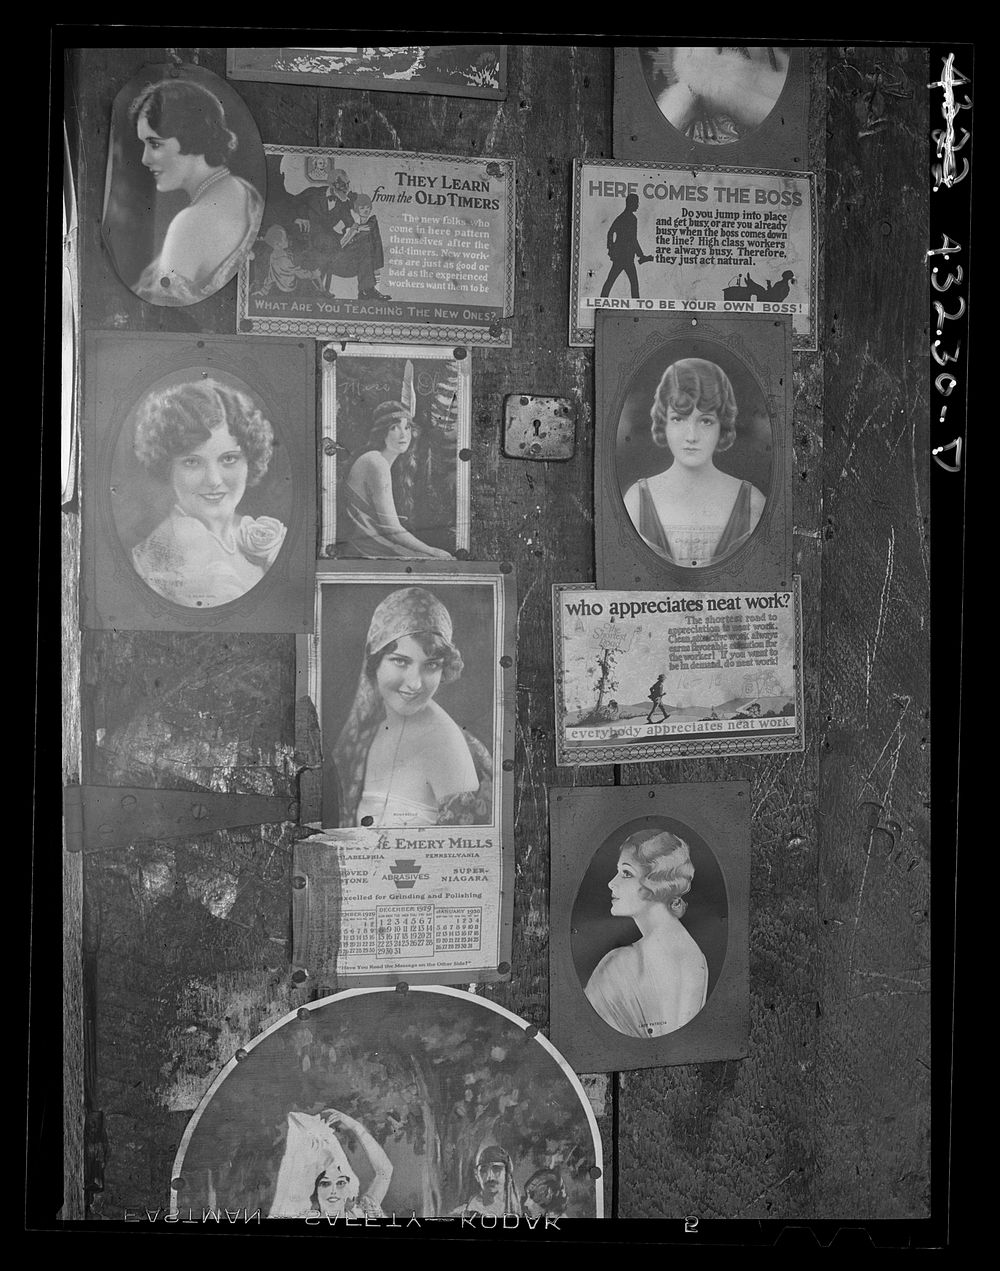 Pictures on a post in the abandoned Olive Stove Works Rochester, Pennsylvania. Sourced from the Library of Congress.